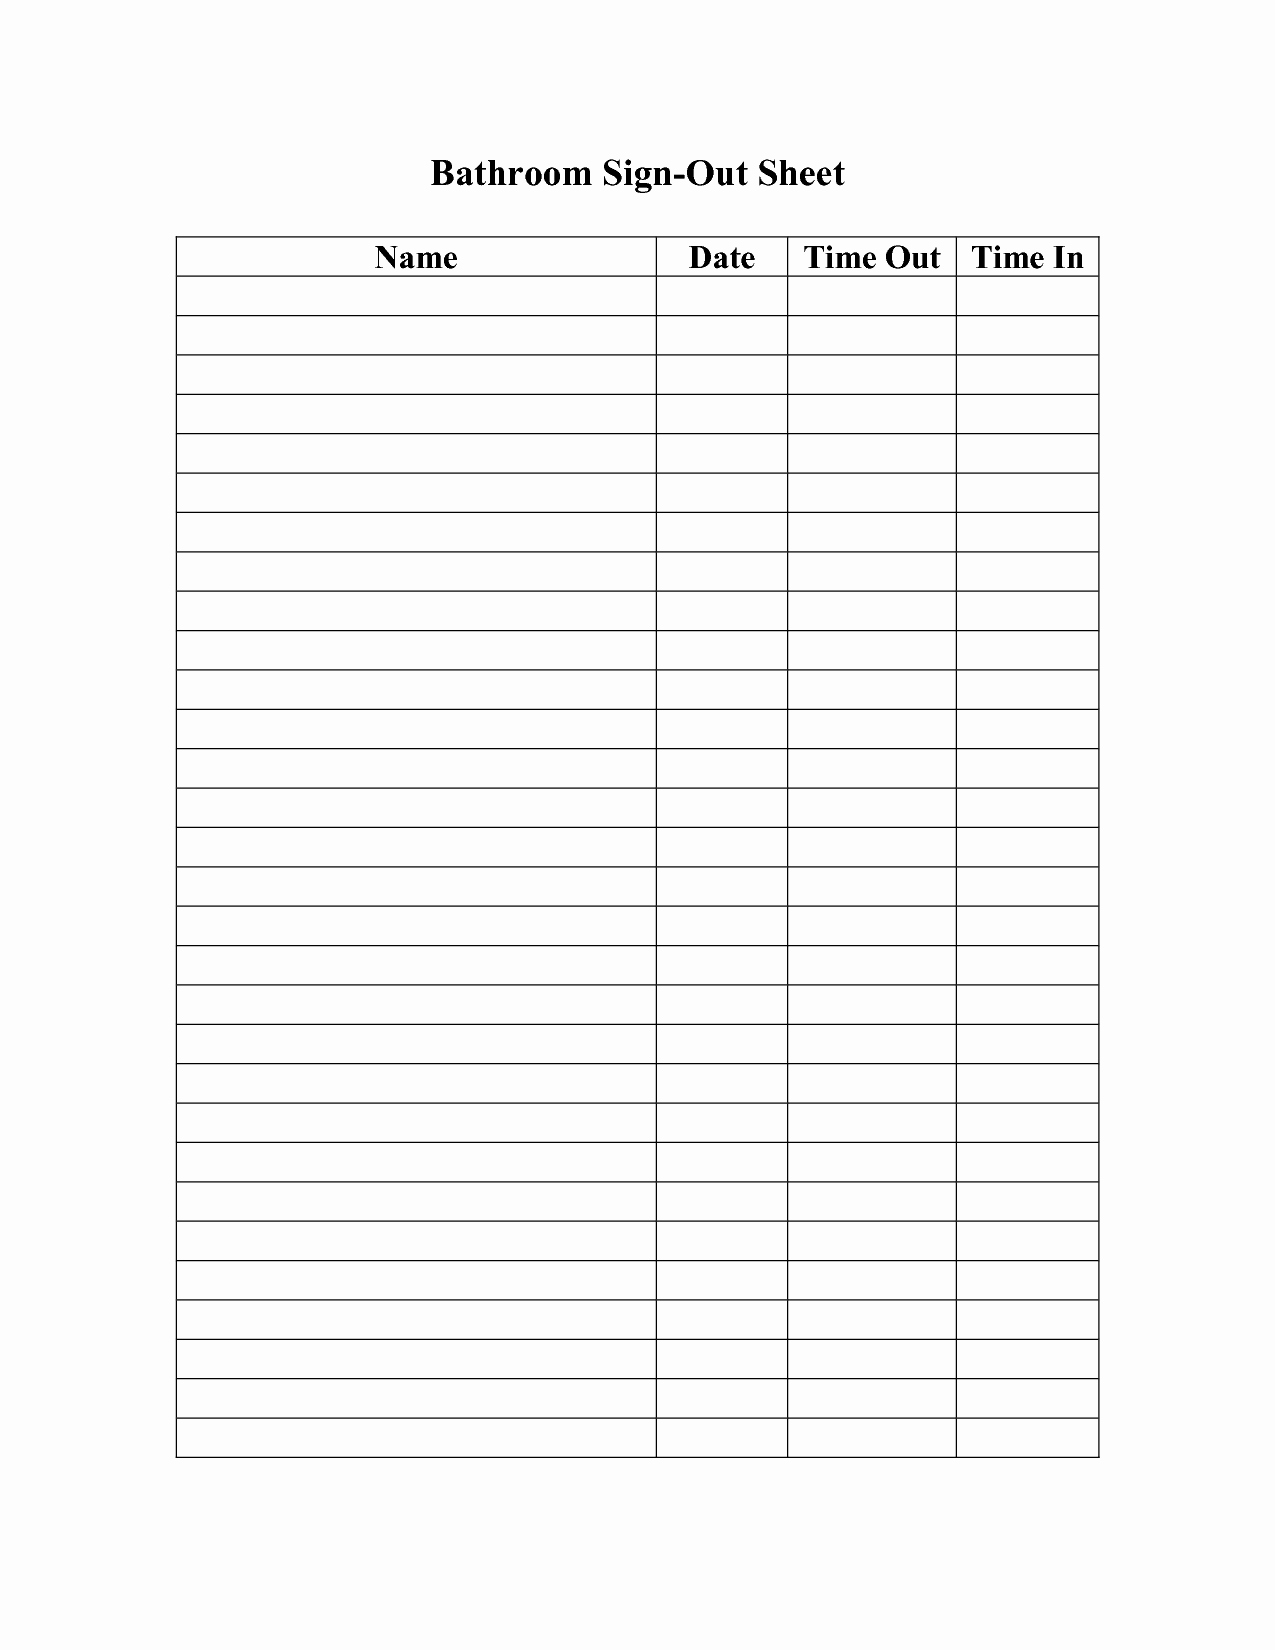 Class Sign In Sheet Template Lovely Bathroom Sign Out Sheet Template